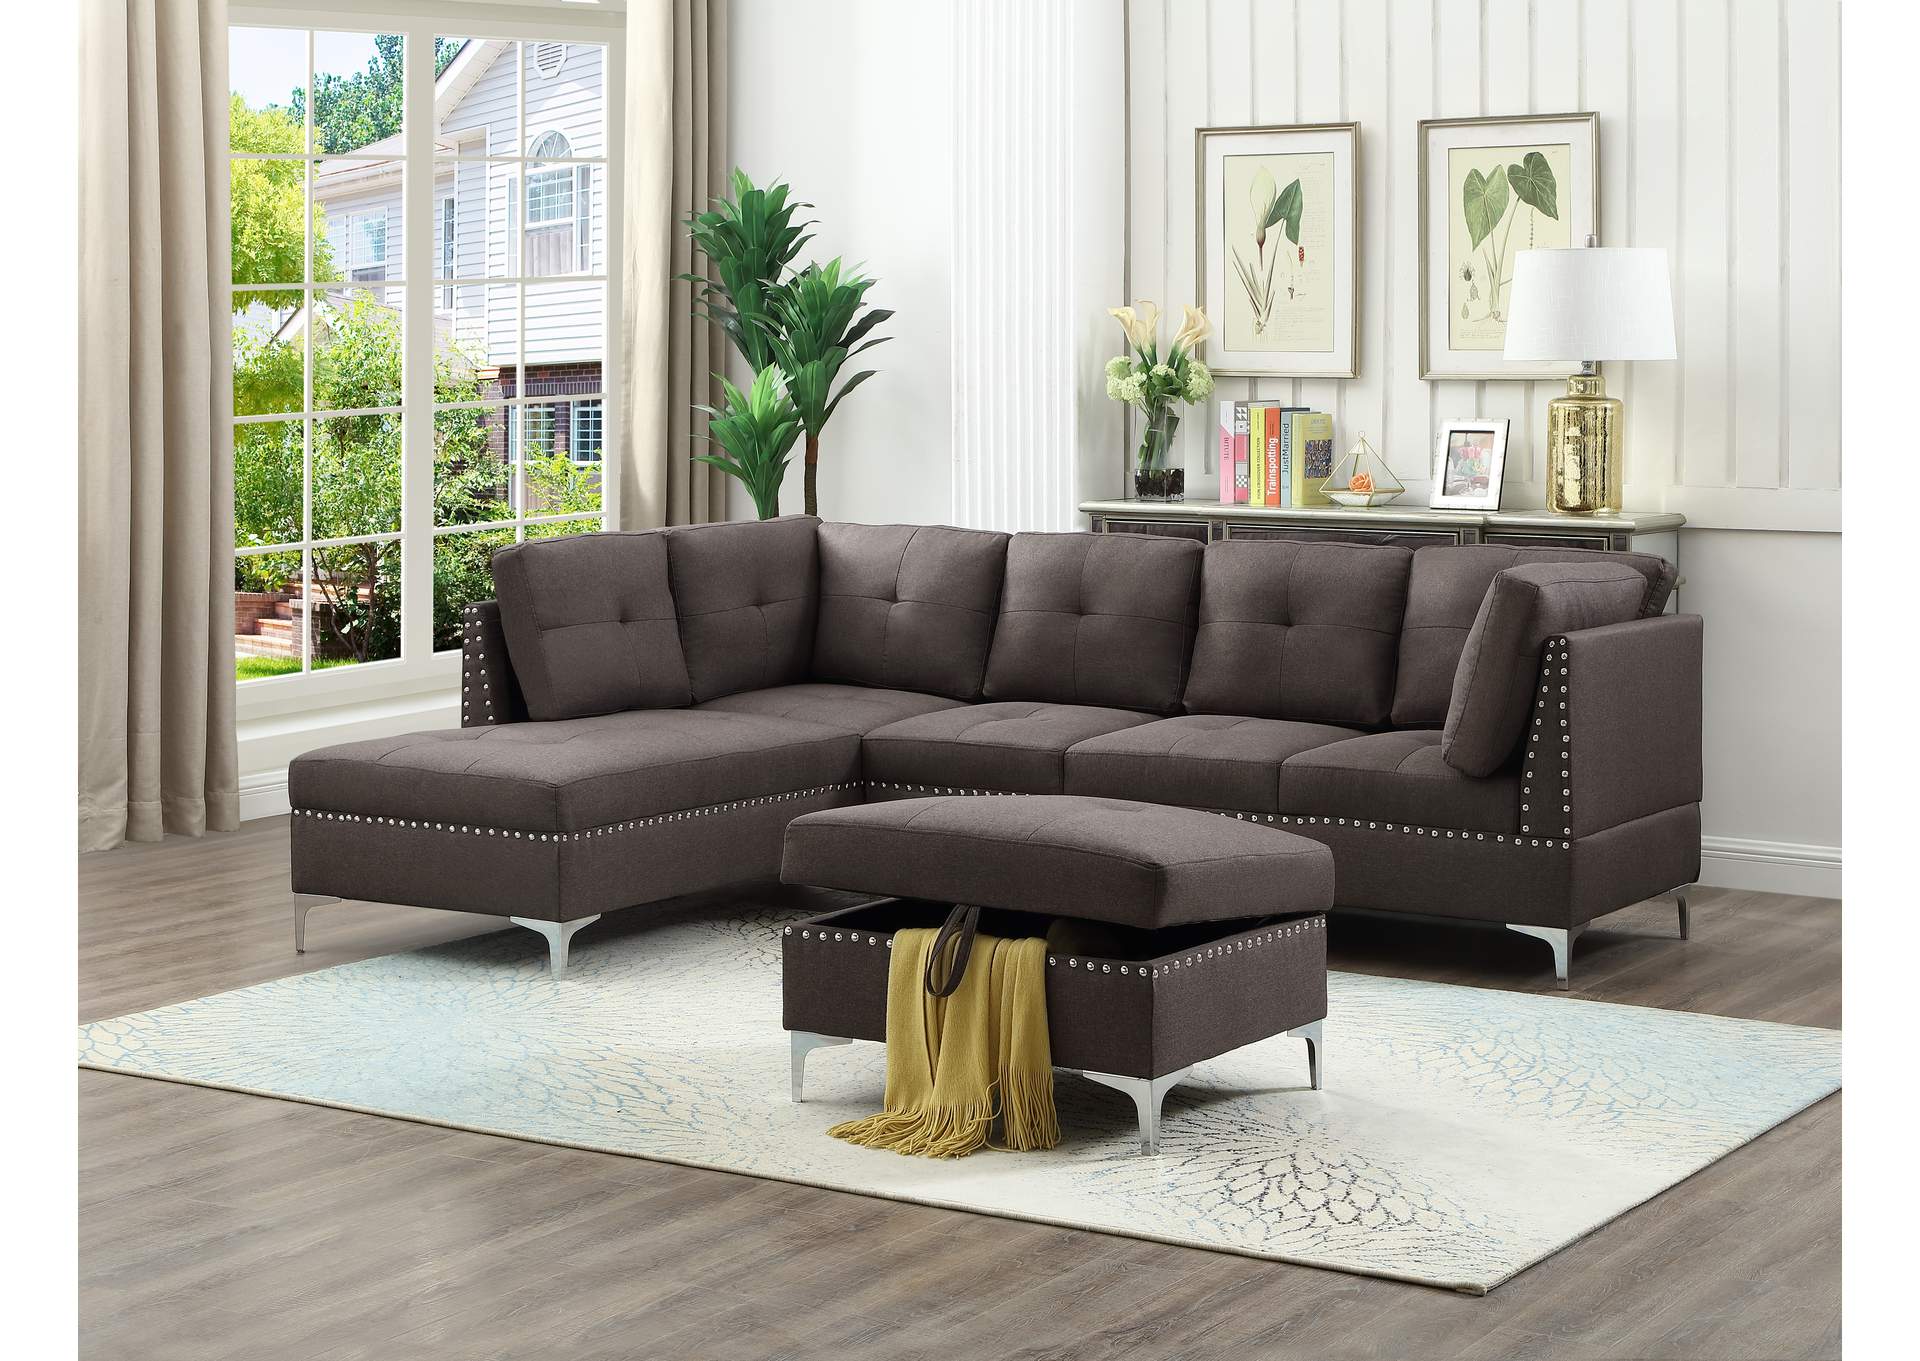 U5033 Brown Sectional Chaise,Global Trading